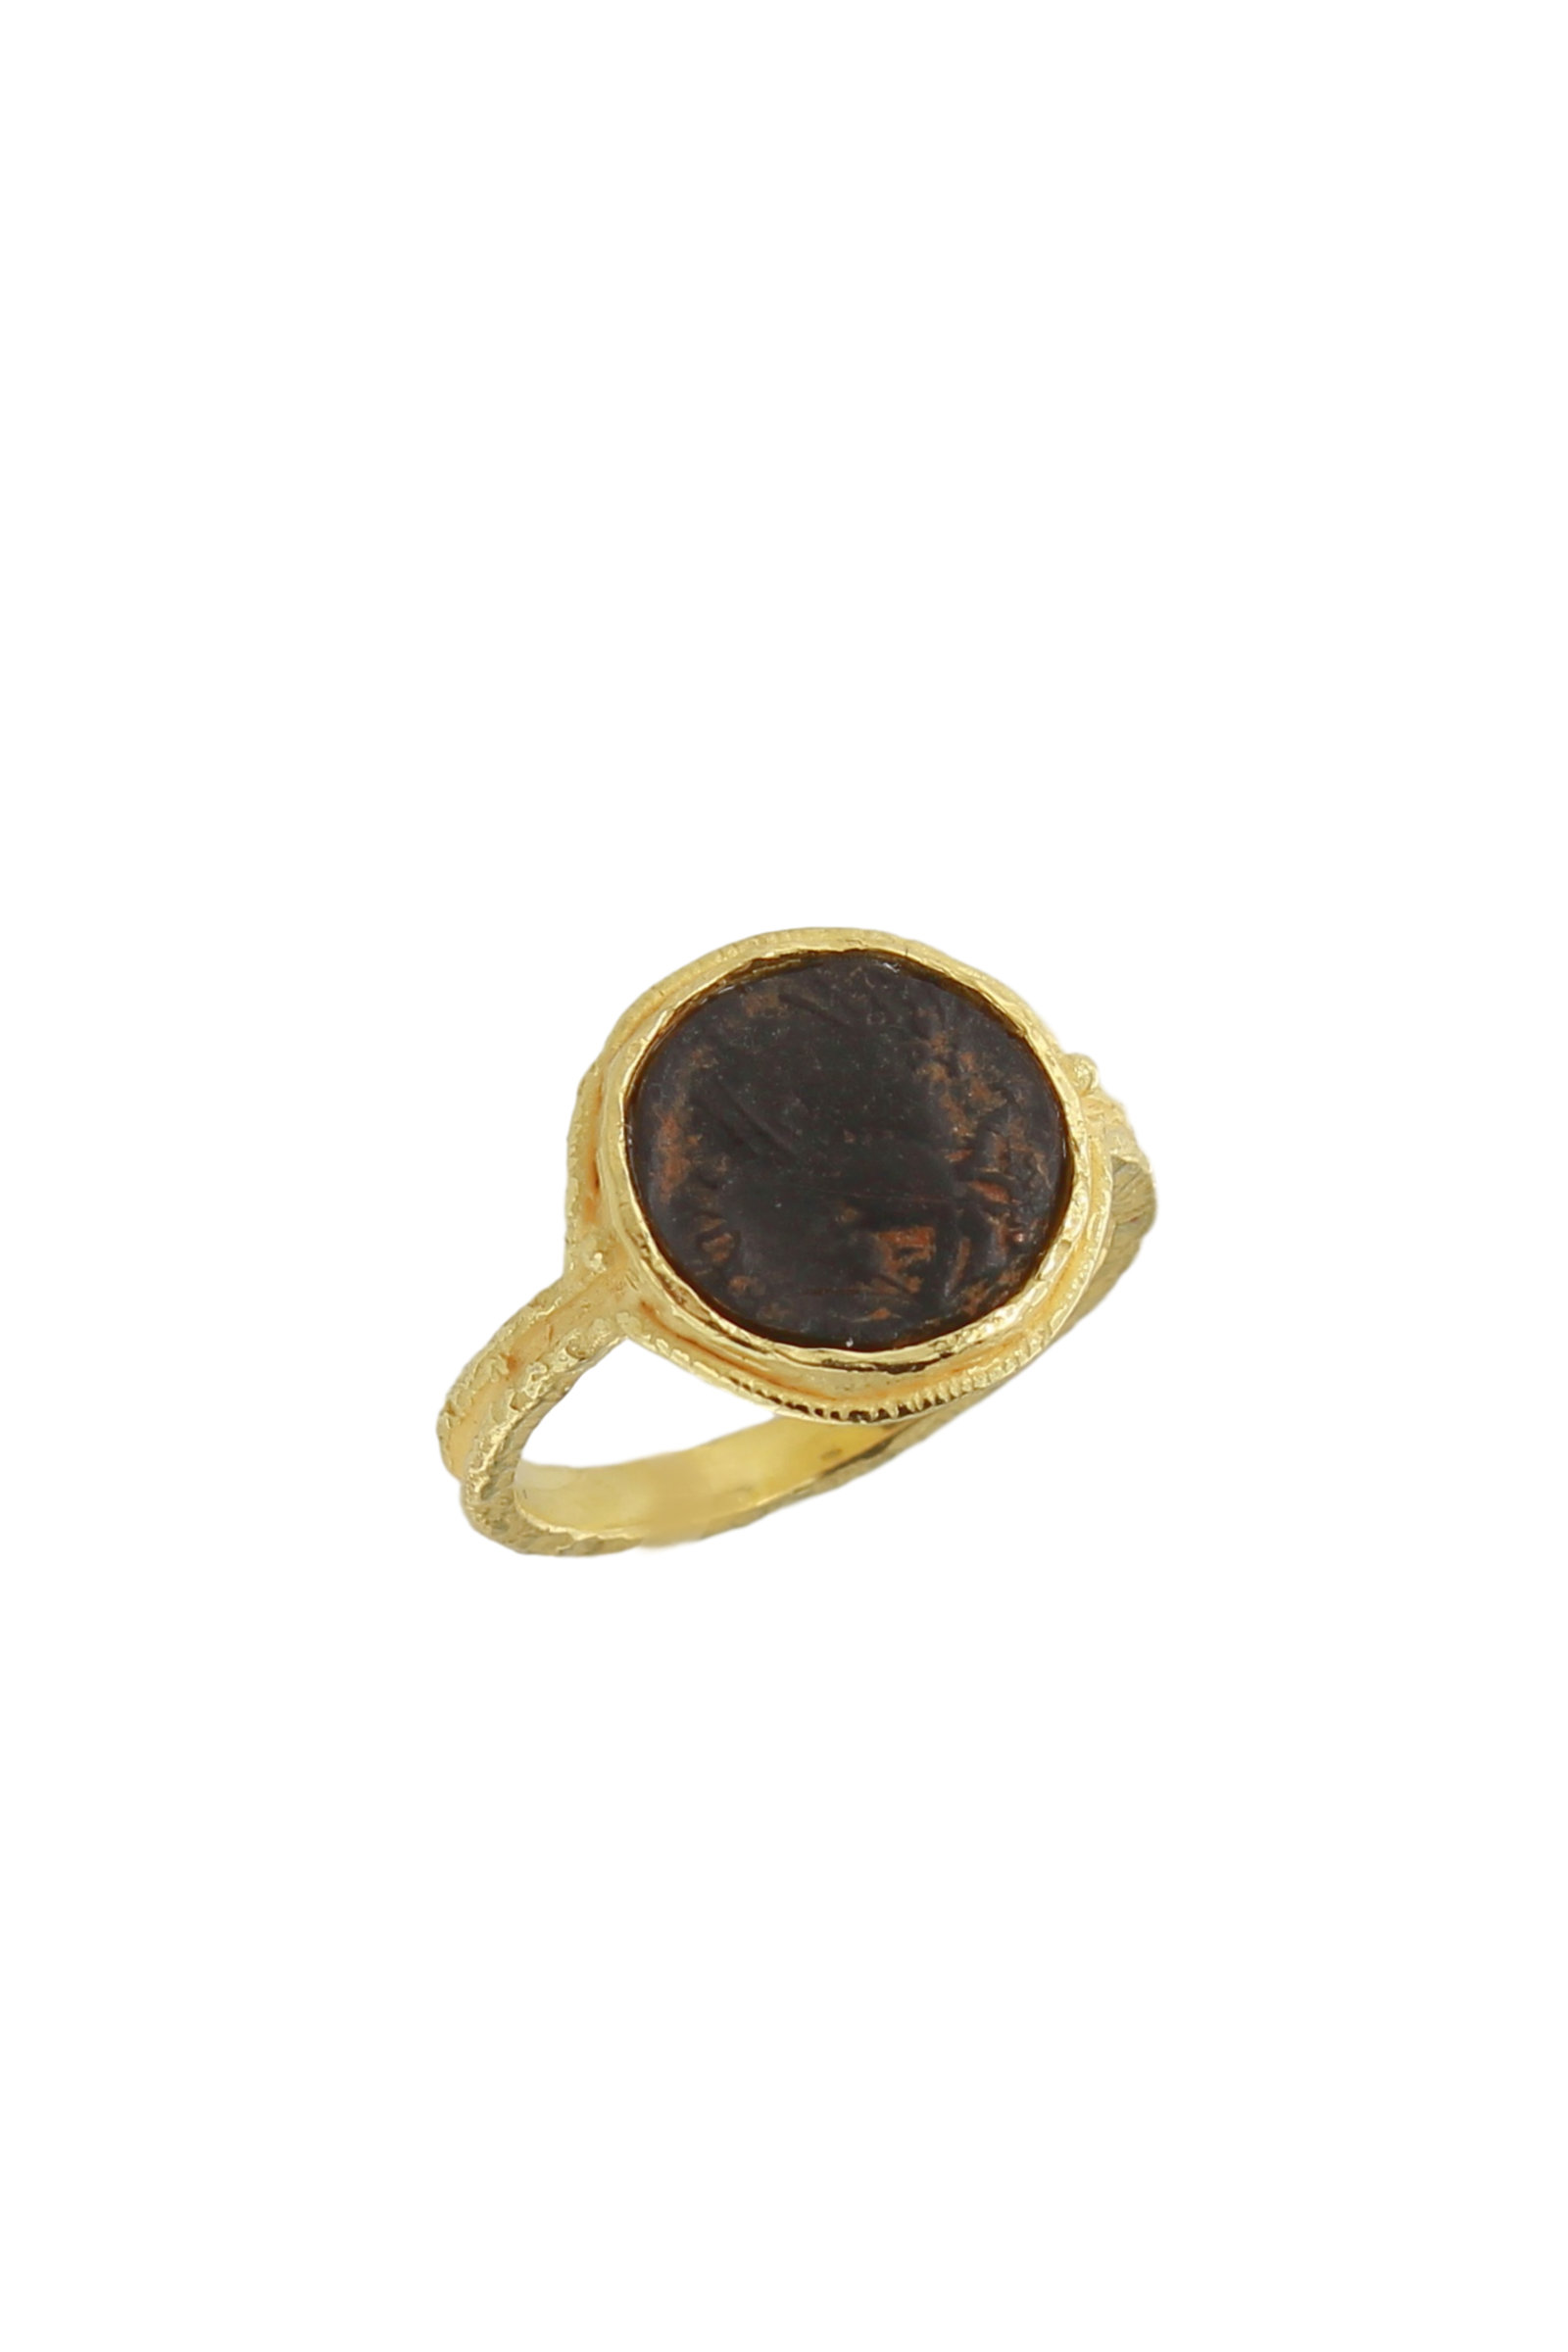 SE614D-18-Kt-Yellow-Gold-Ring-with-Roman-Coin-1